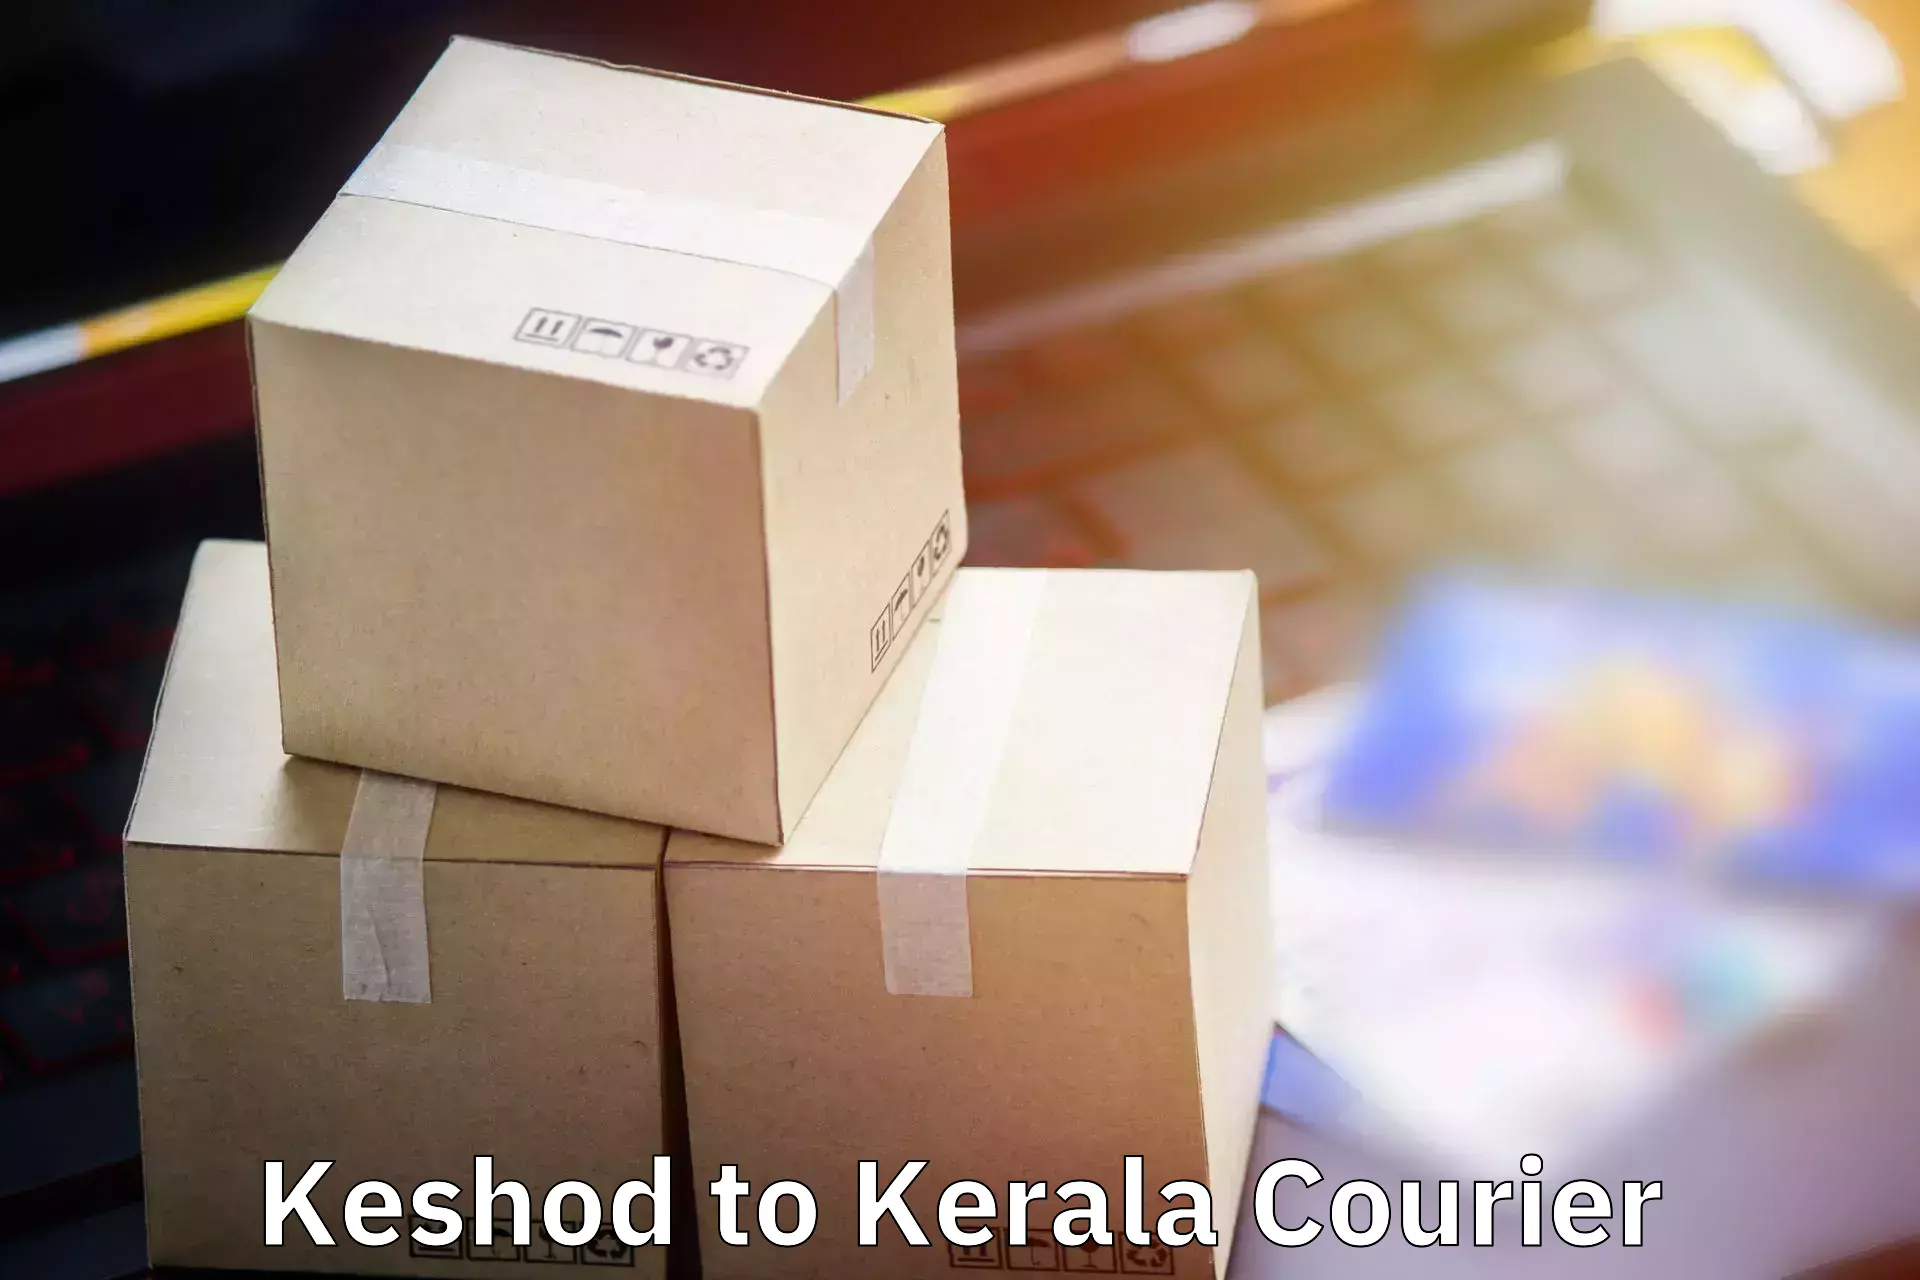 Luggage shipping service Keshod to Cochin University of Science and Technology